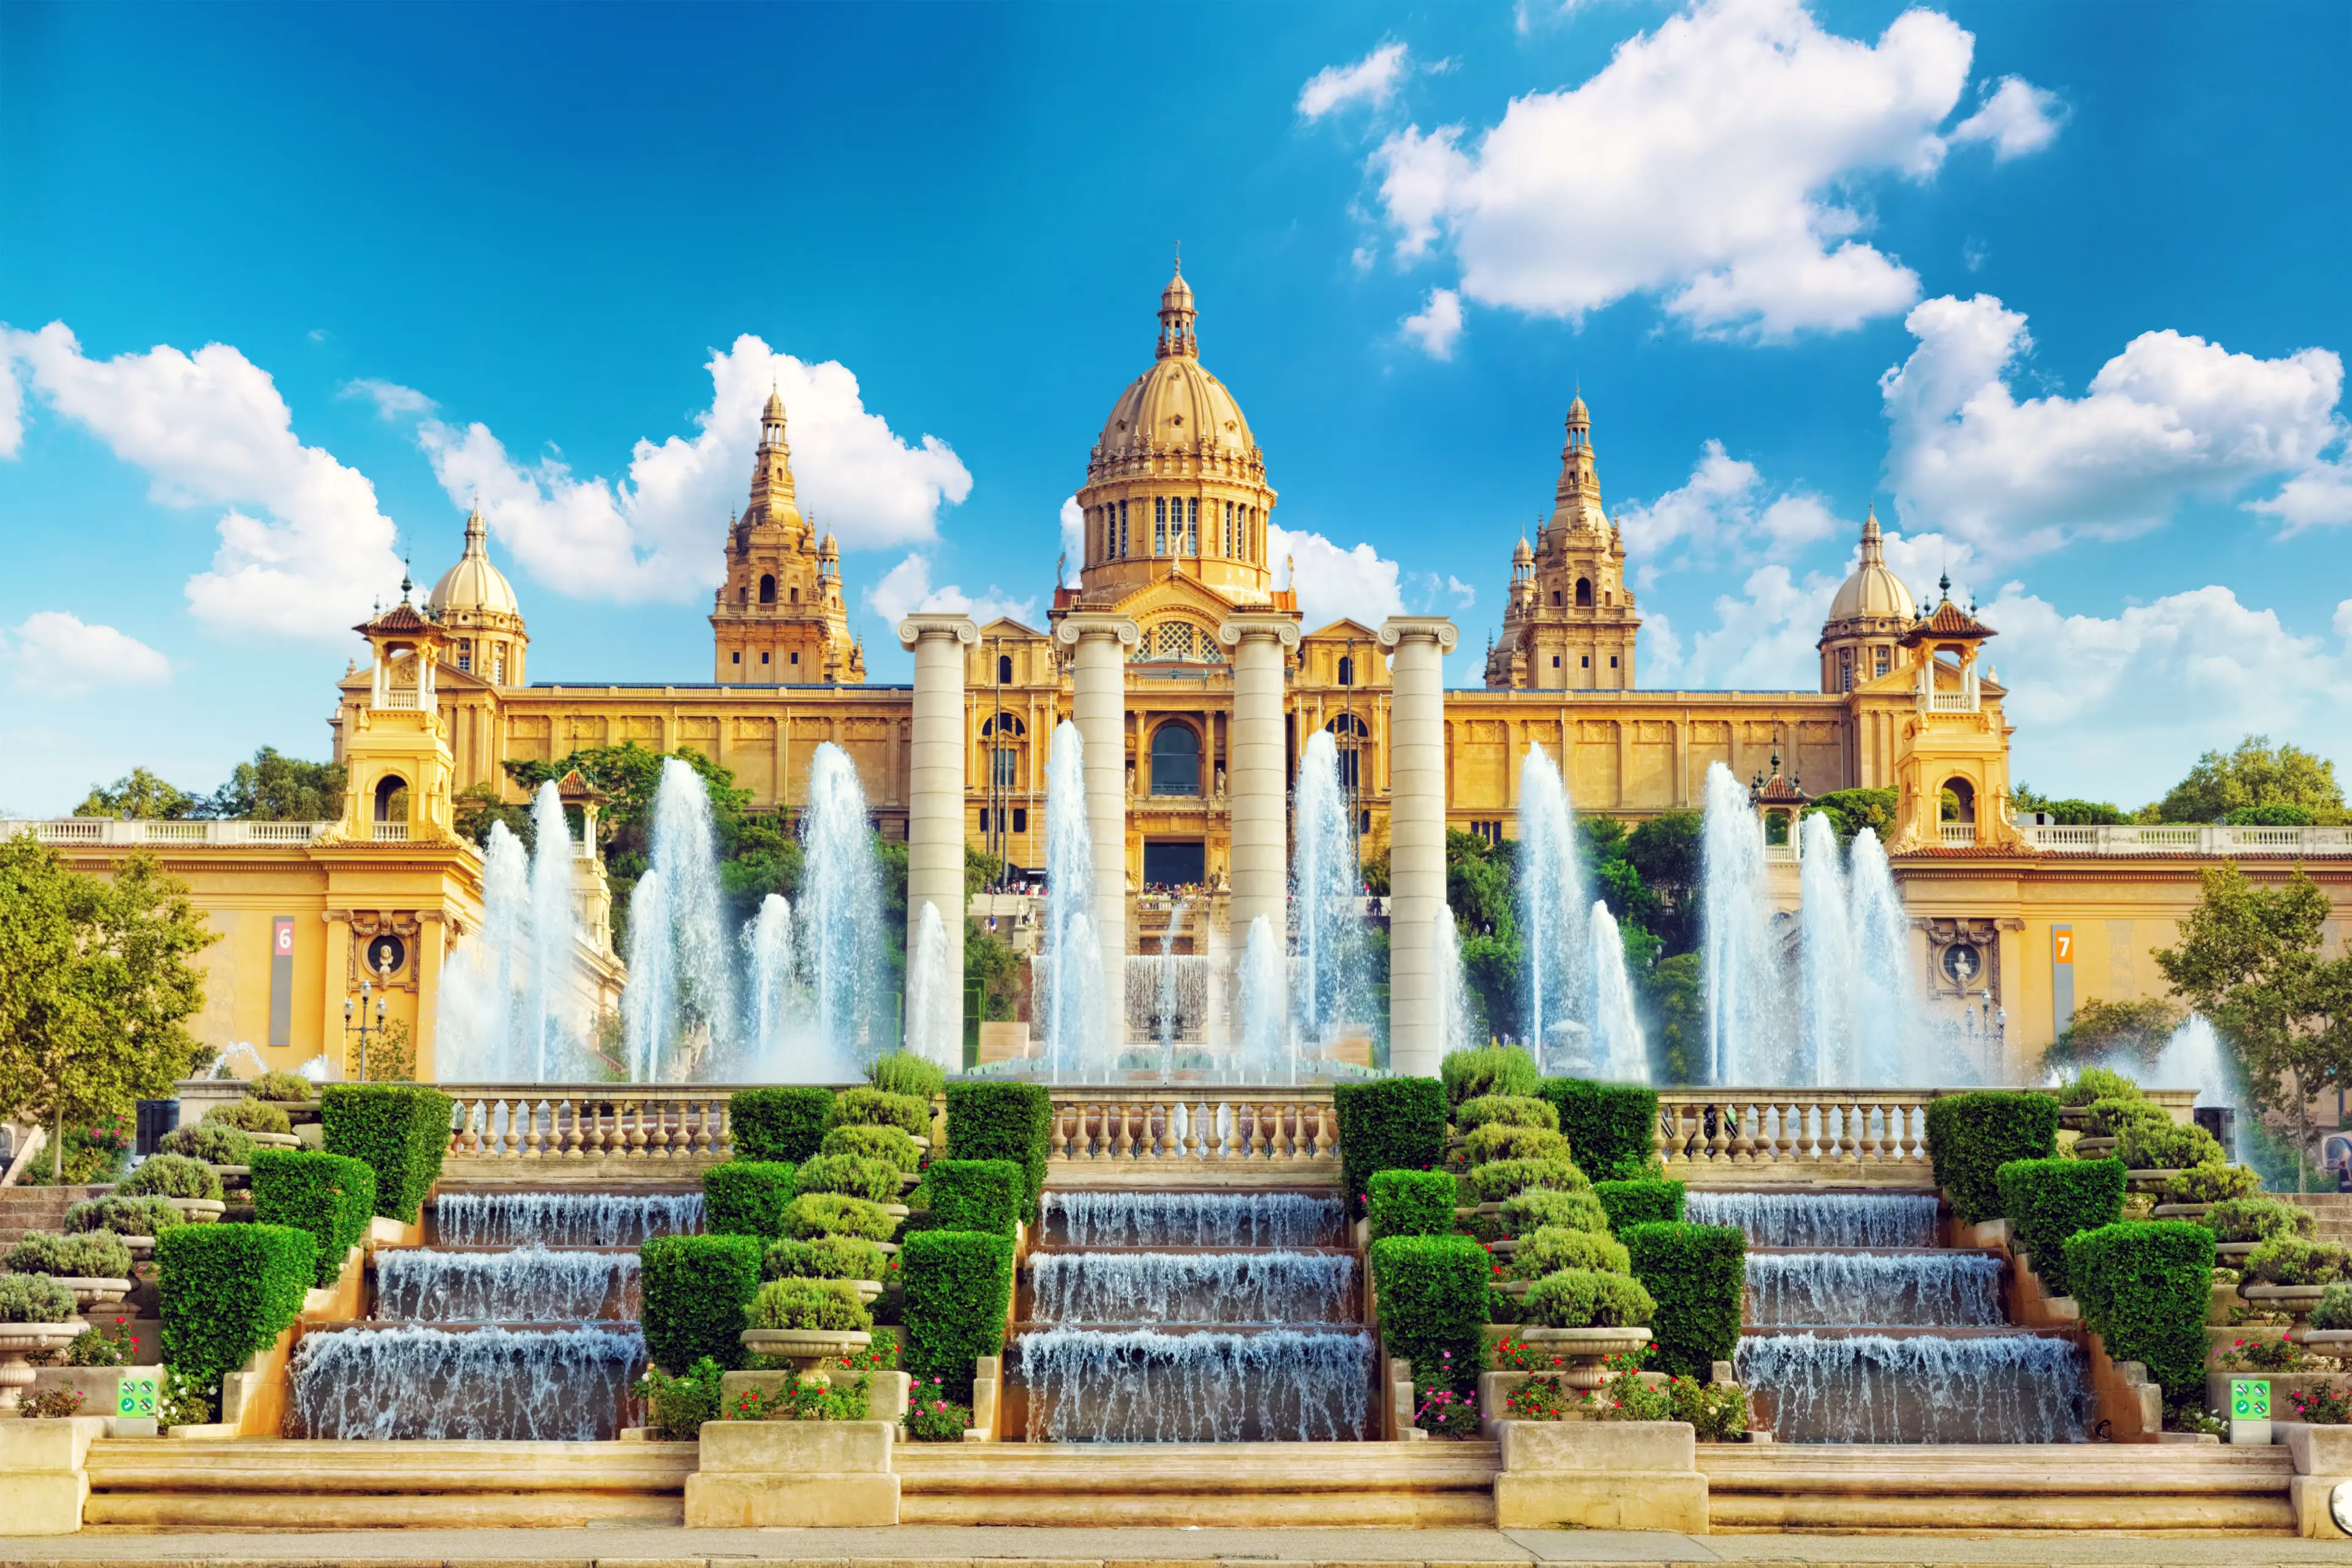 3-Day Barcelona Adventure: Off-the-Beaten-Path with Friends